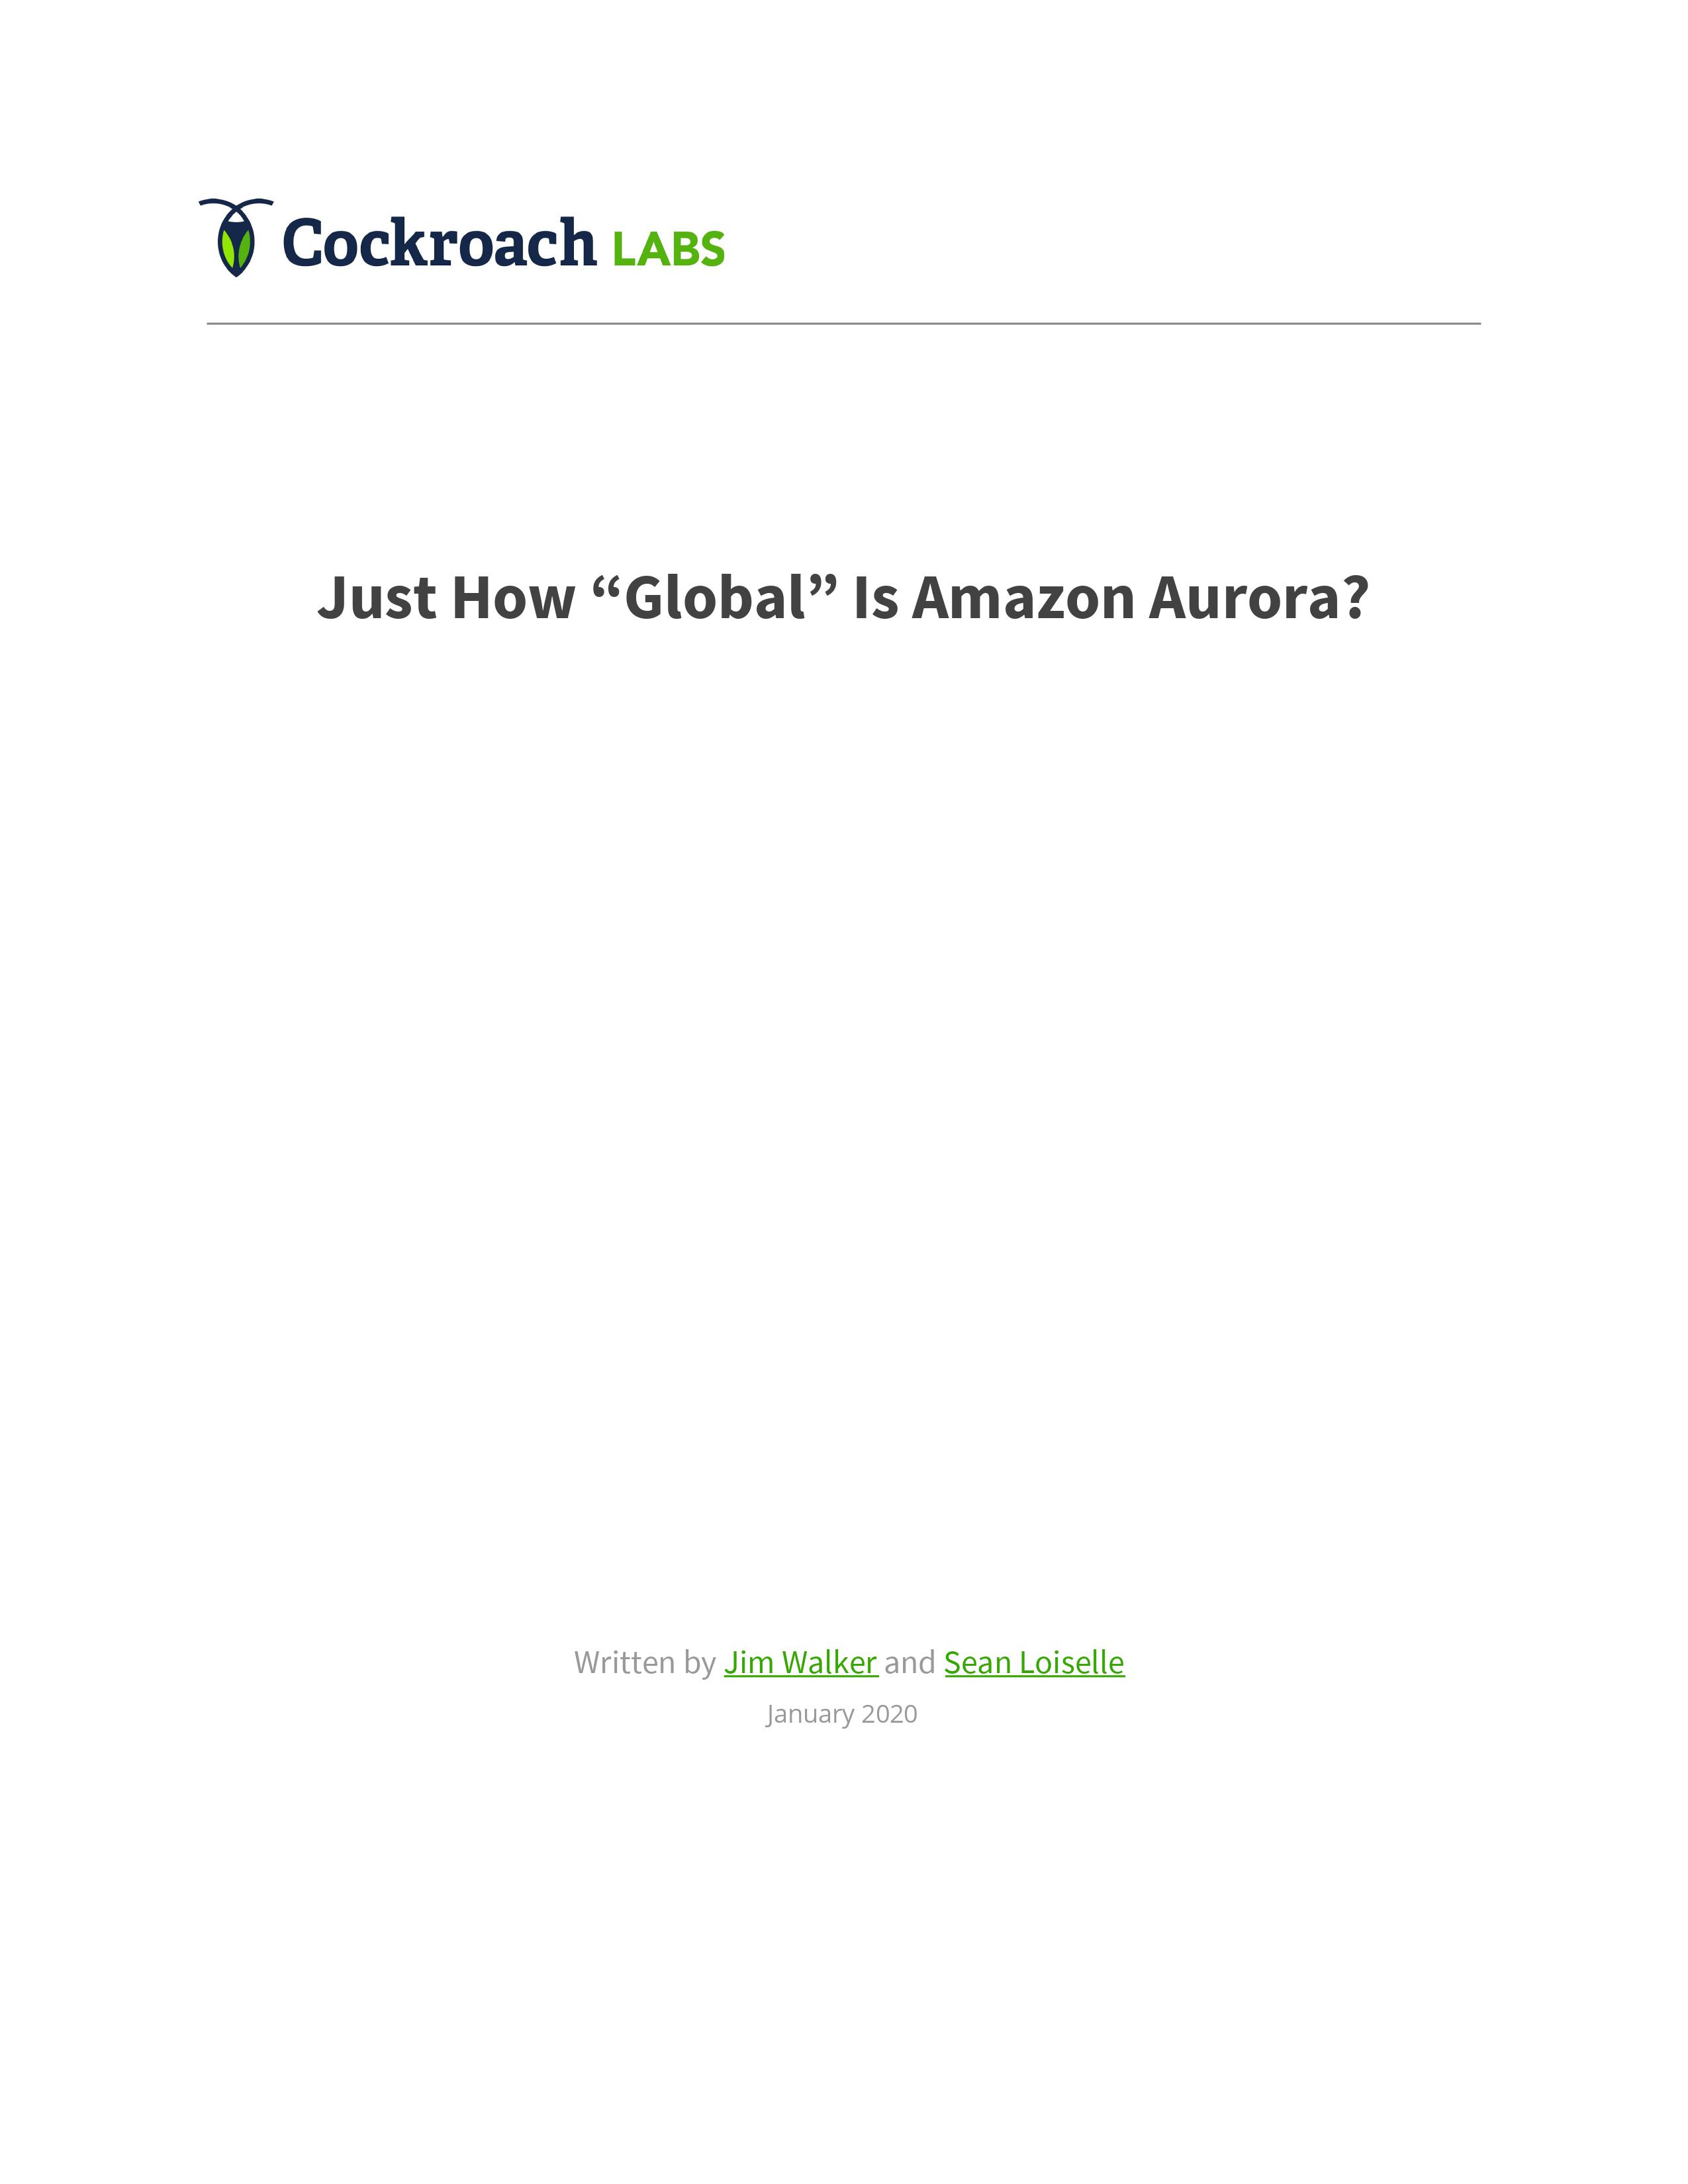 Just how global is "Amazon Aurora"?